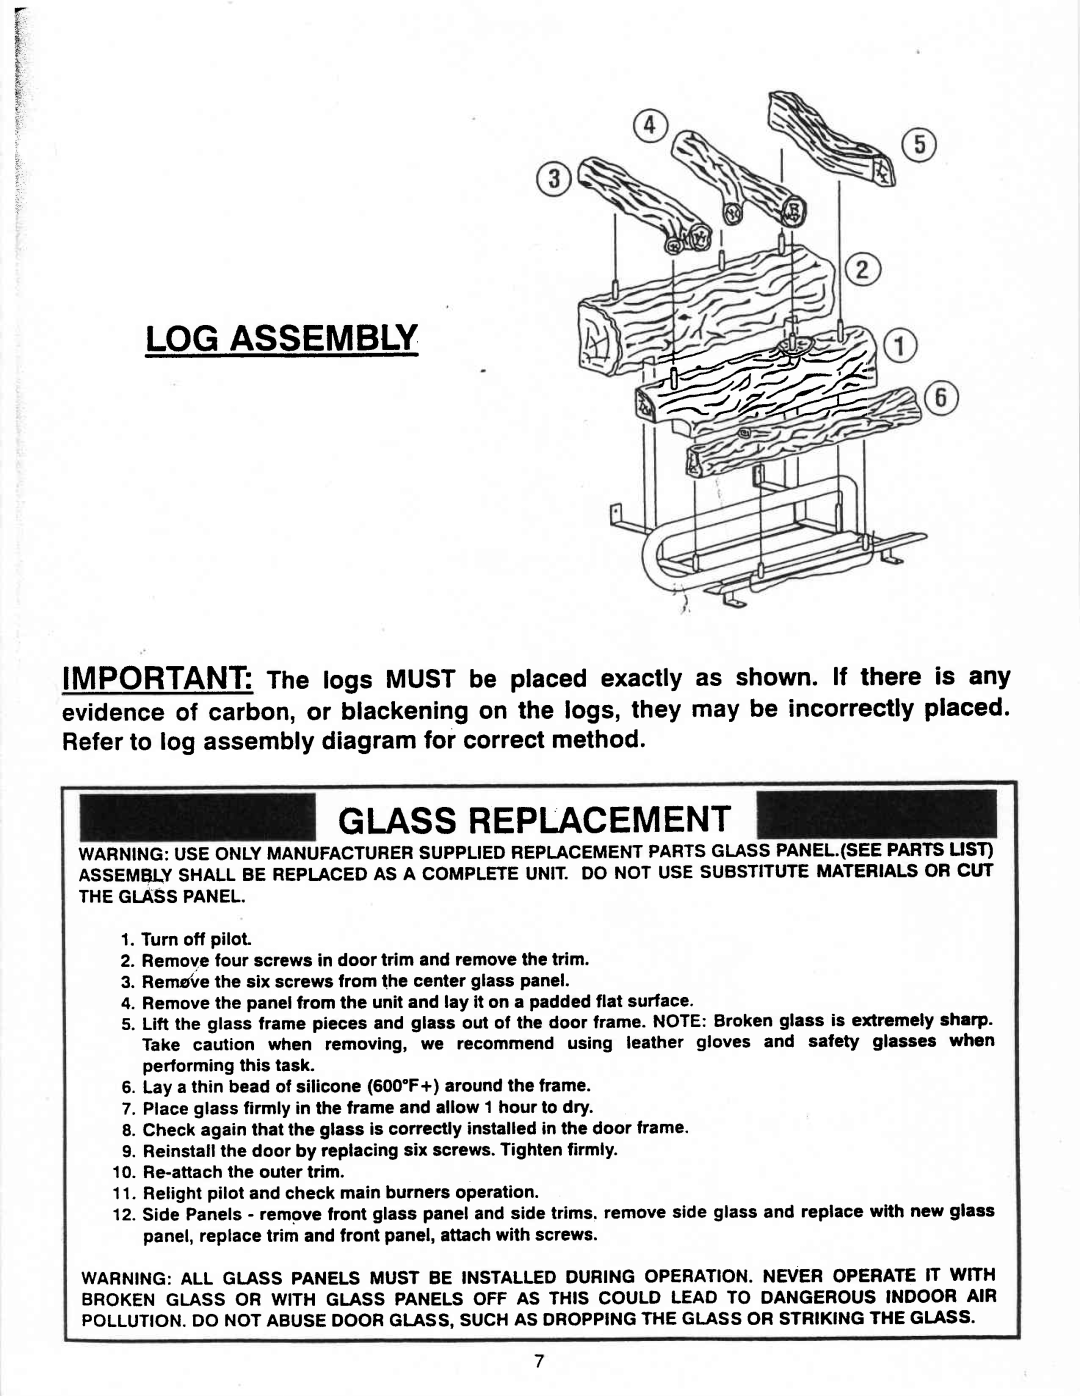 Vermont Casting G600 manual Glassrepi-Acement, Logassembly 